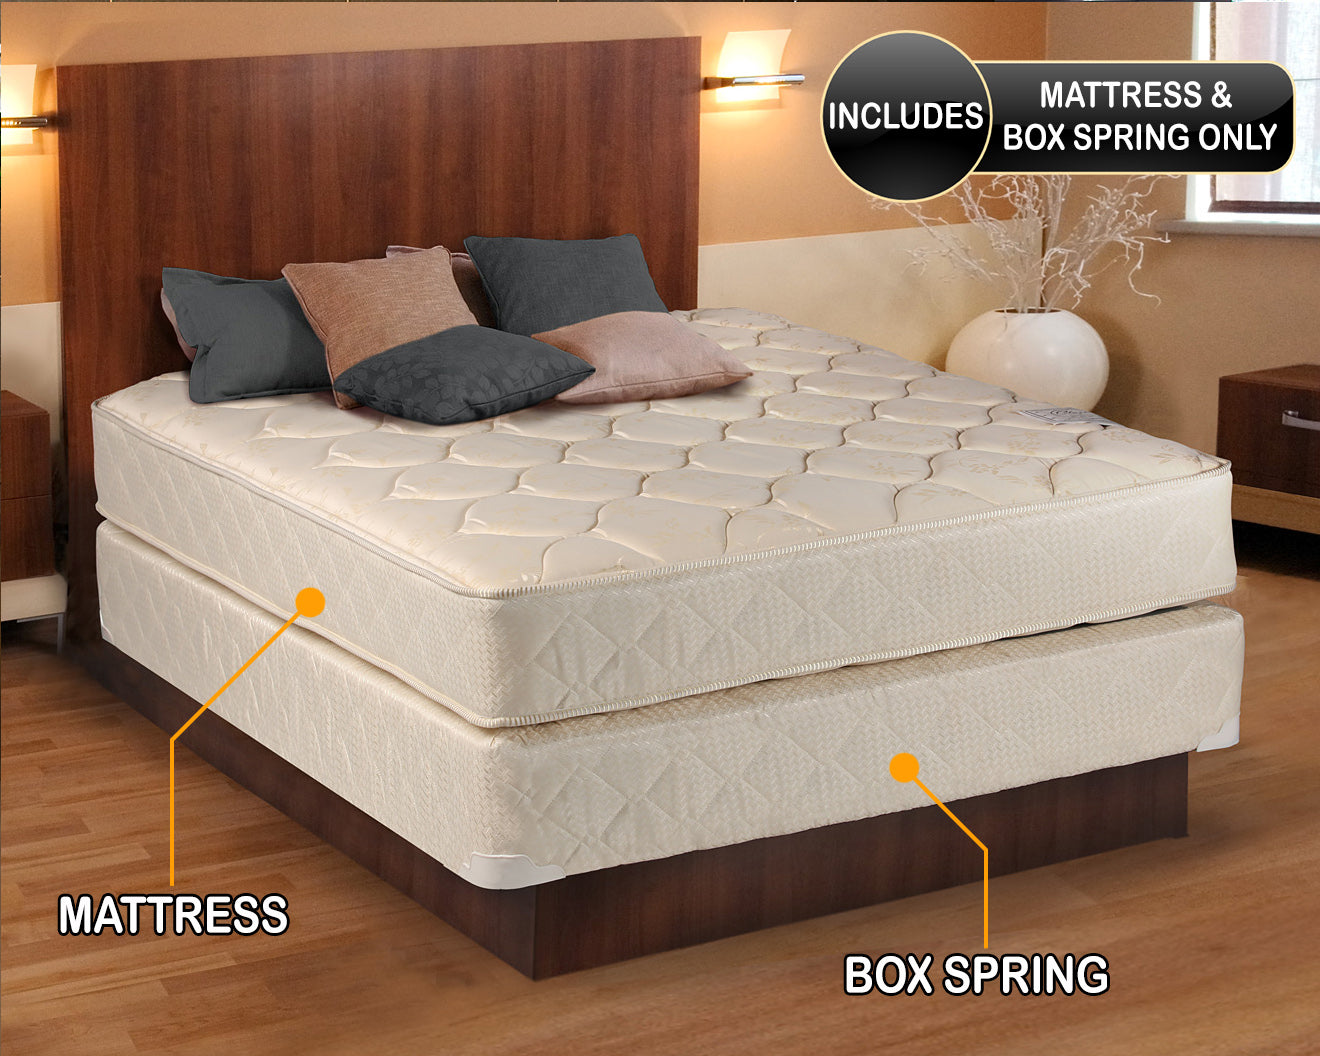 Comfort Classic 2-Sided Twin XL Gentle Firm Mattress and Box Spring Set